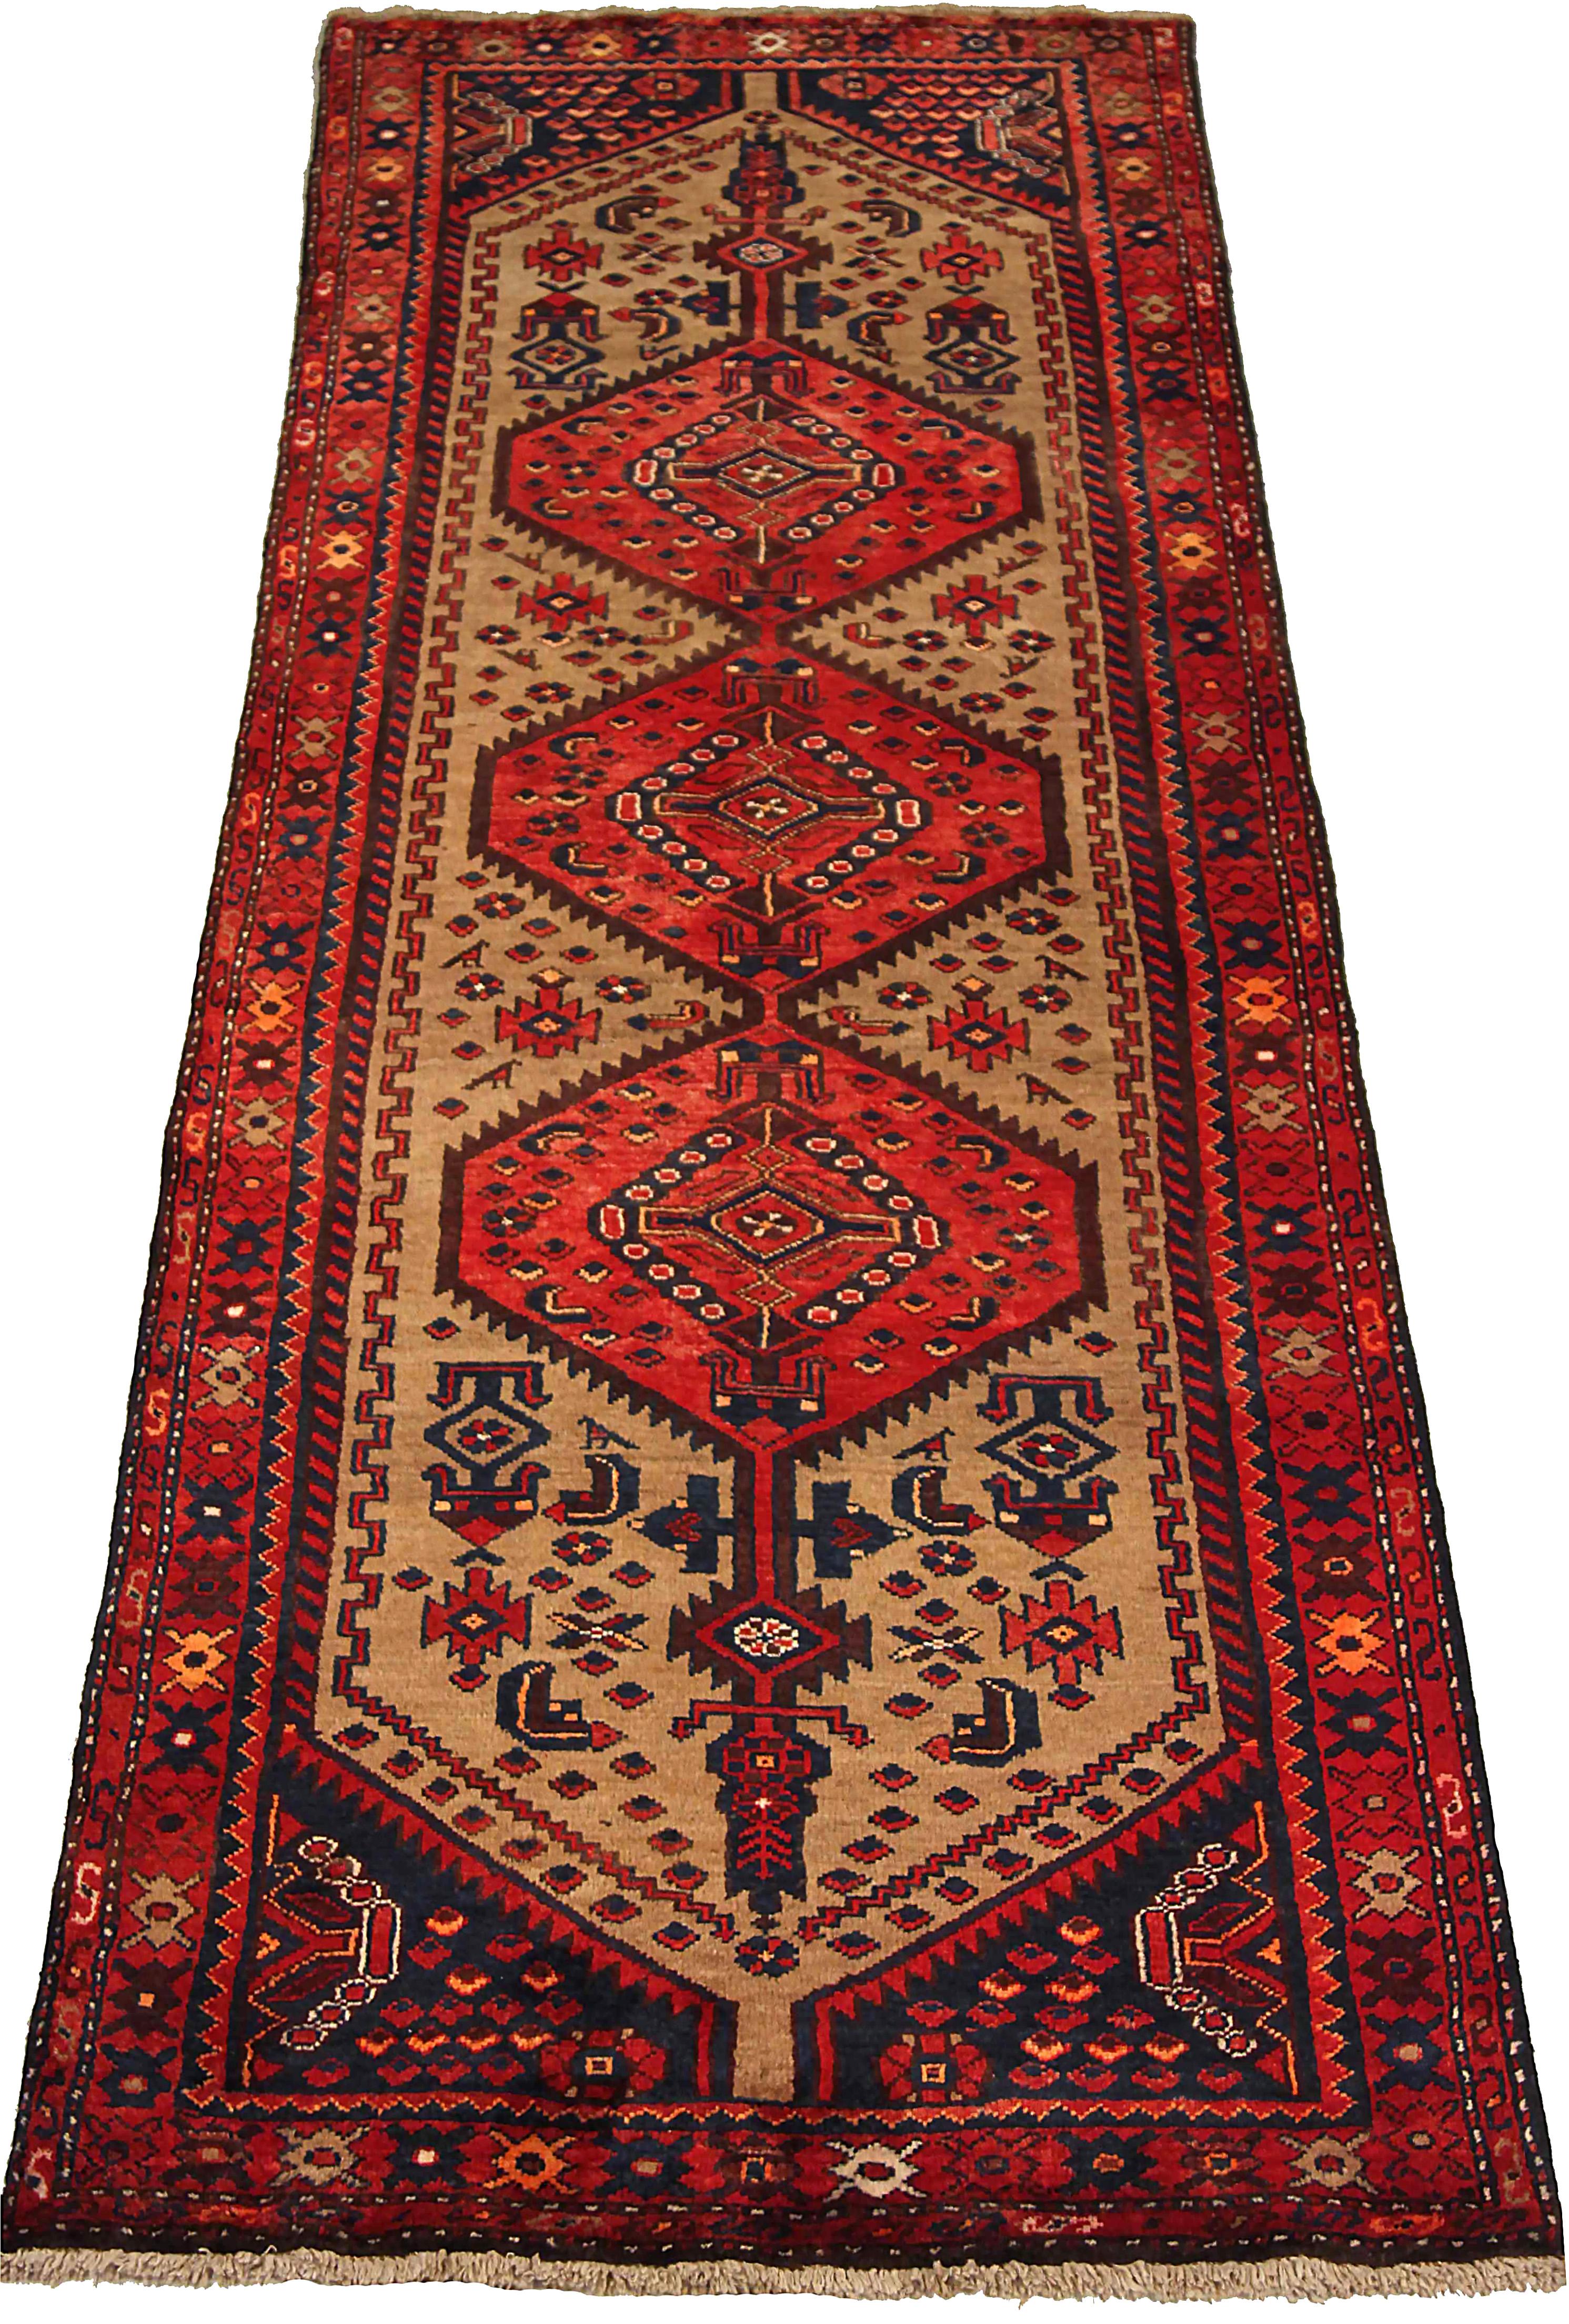 Antique Persian runner rug handwoven from the finest sheep’s wool. It’s colored with all-natural vegetable dyes that are safe for humans and pets. It’s a traditional Zanjan design handwoven by expert artisans. It’s a lovely runner rug that can be